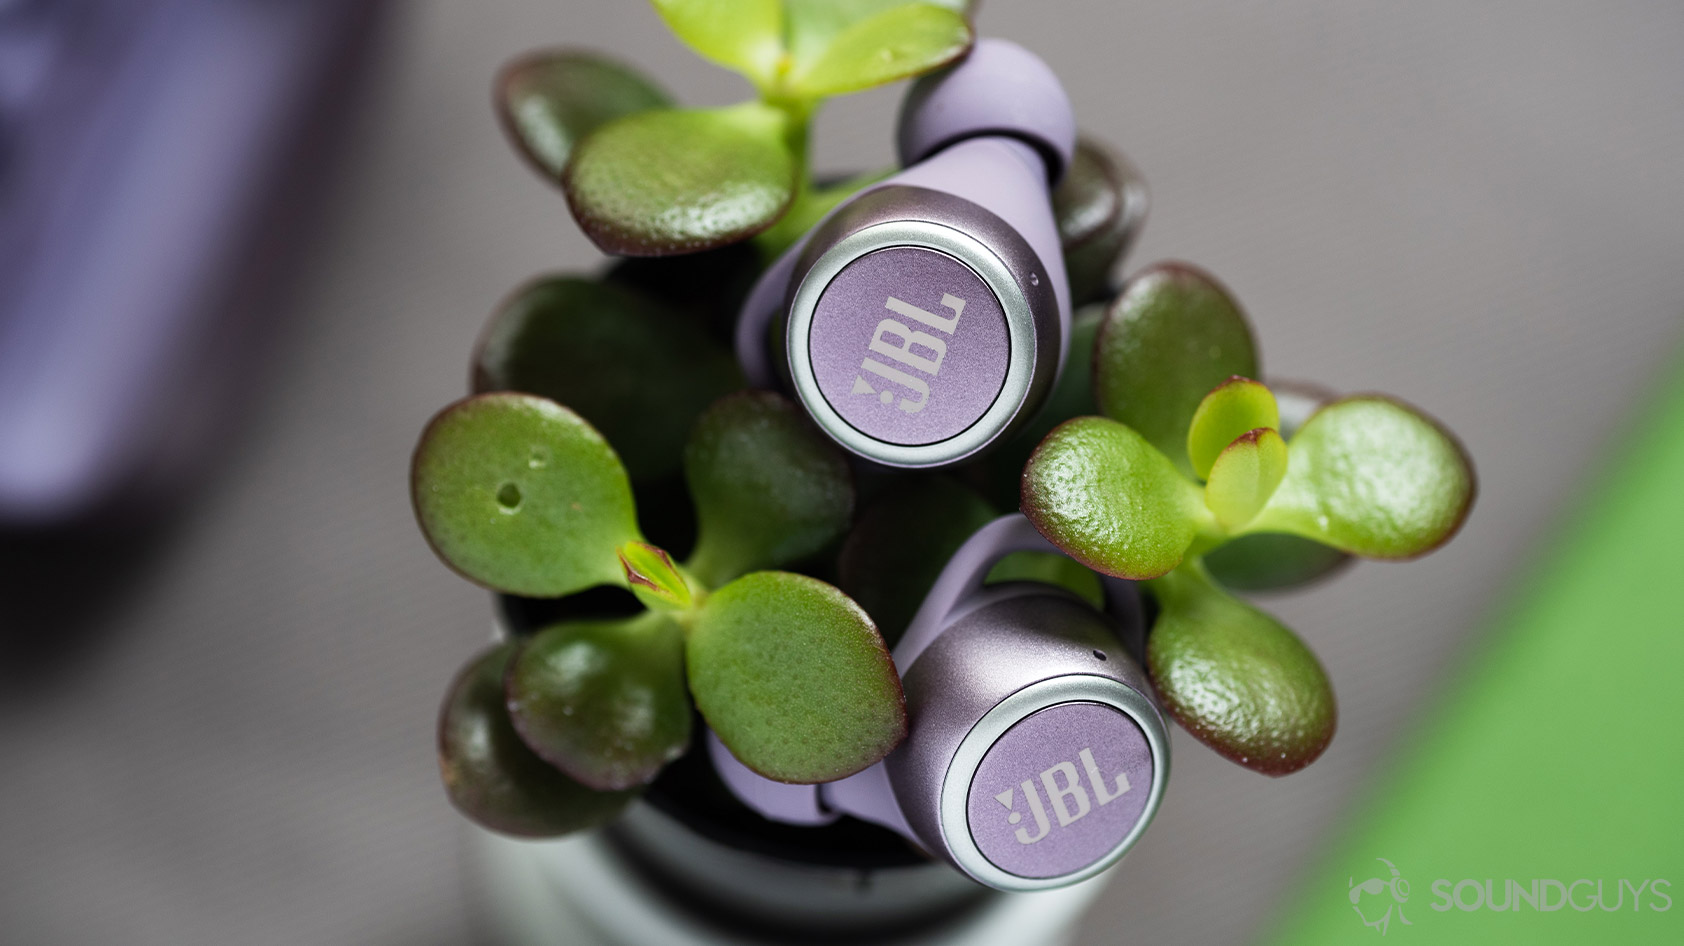 The JBL LIVE 300 TWS true wireless earbuds on top of a succulent.